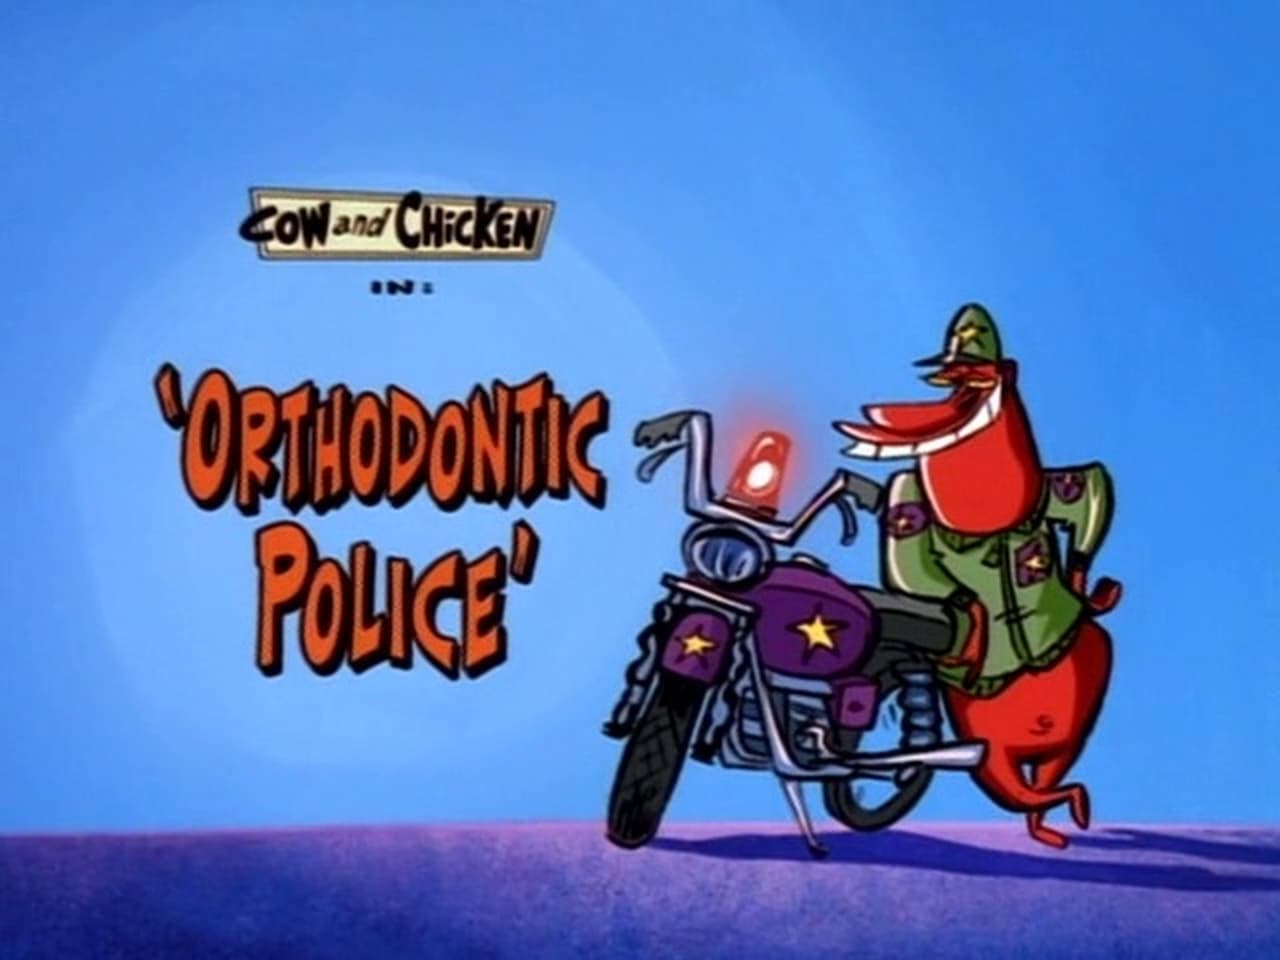 Cow and Chicken - Season 1 Episode 15 : Orthodontic Police